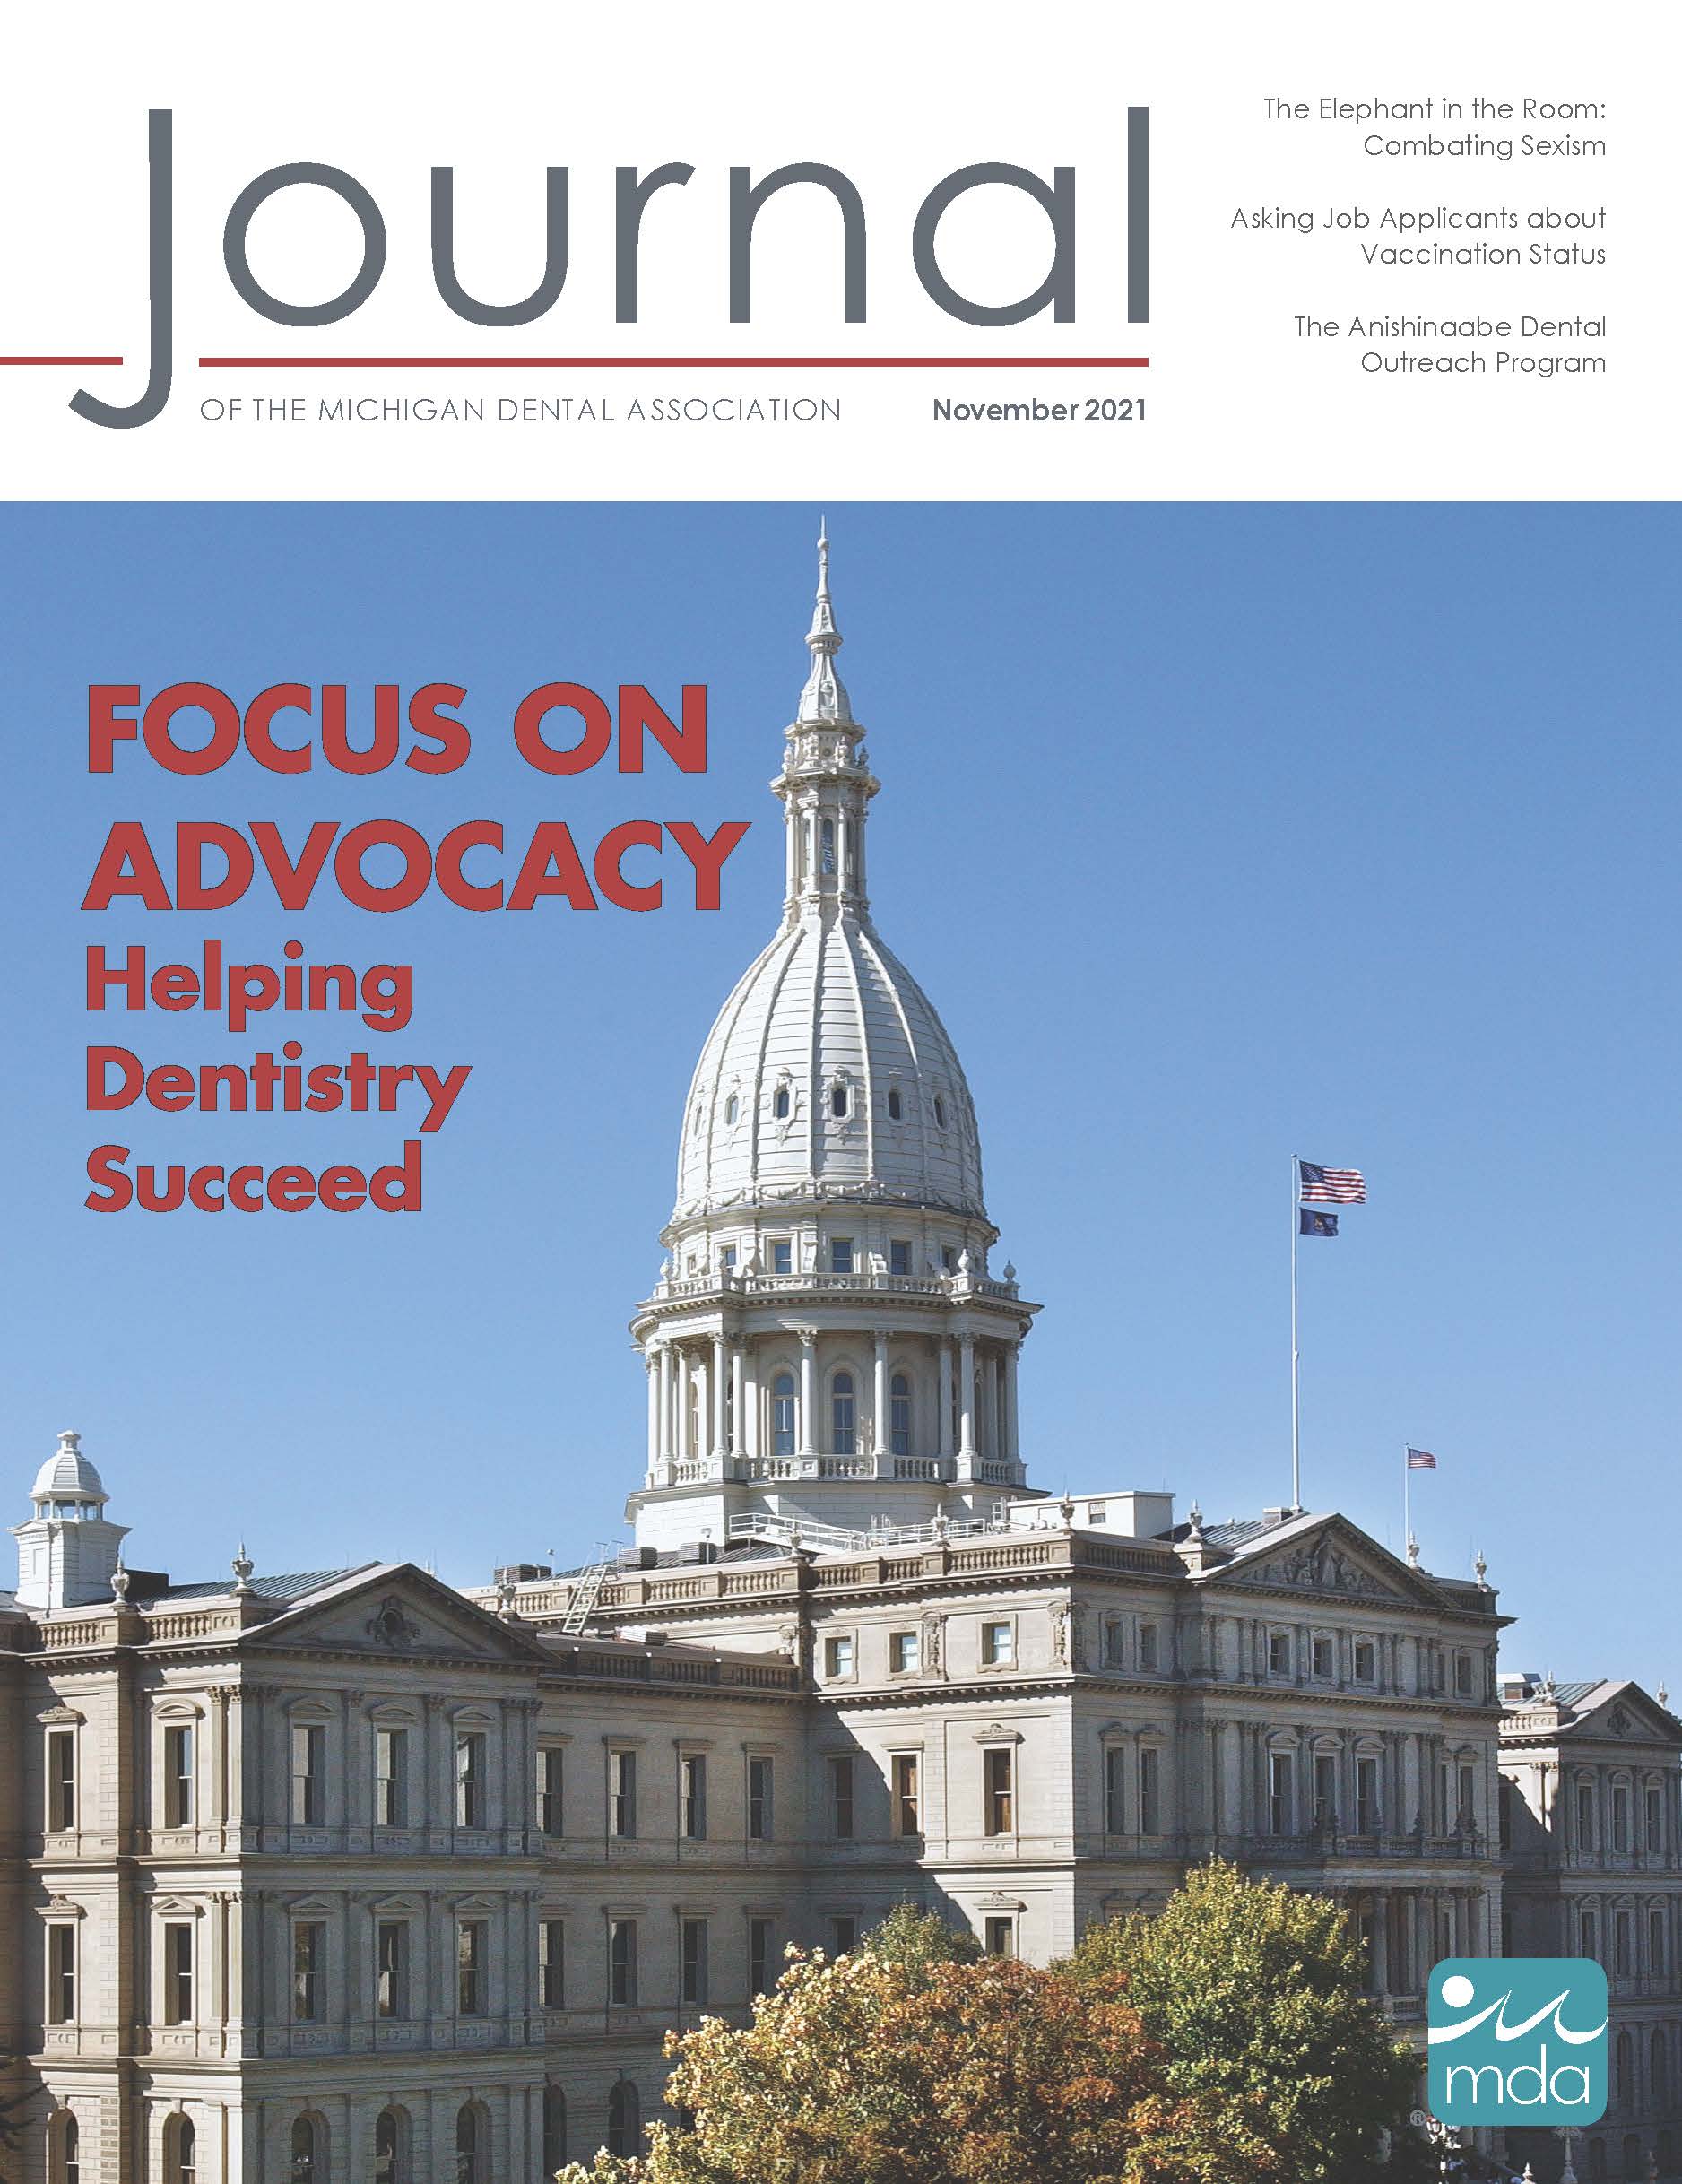 Cover of the Journal of the Michigan Dental Association with the MI capitol building